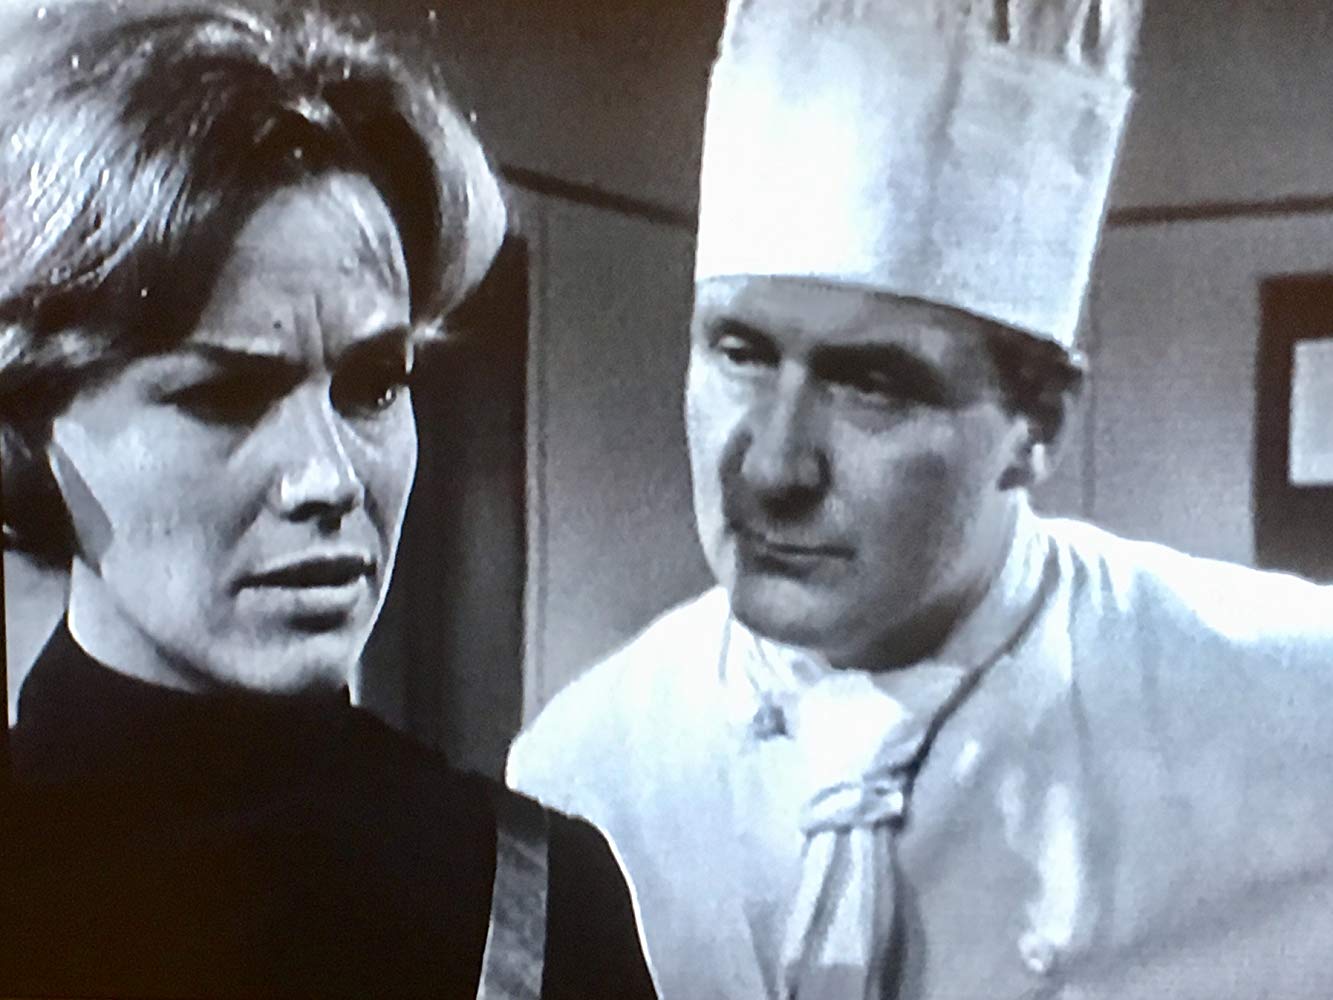 Mrs Gale with Steed in chef's whites